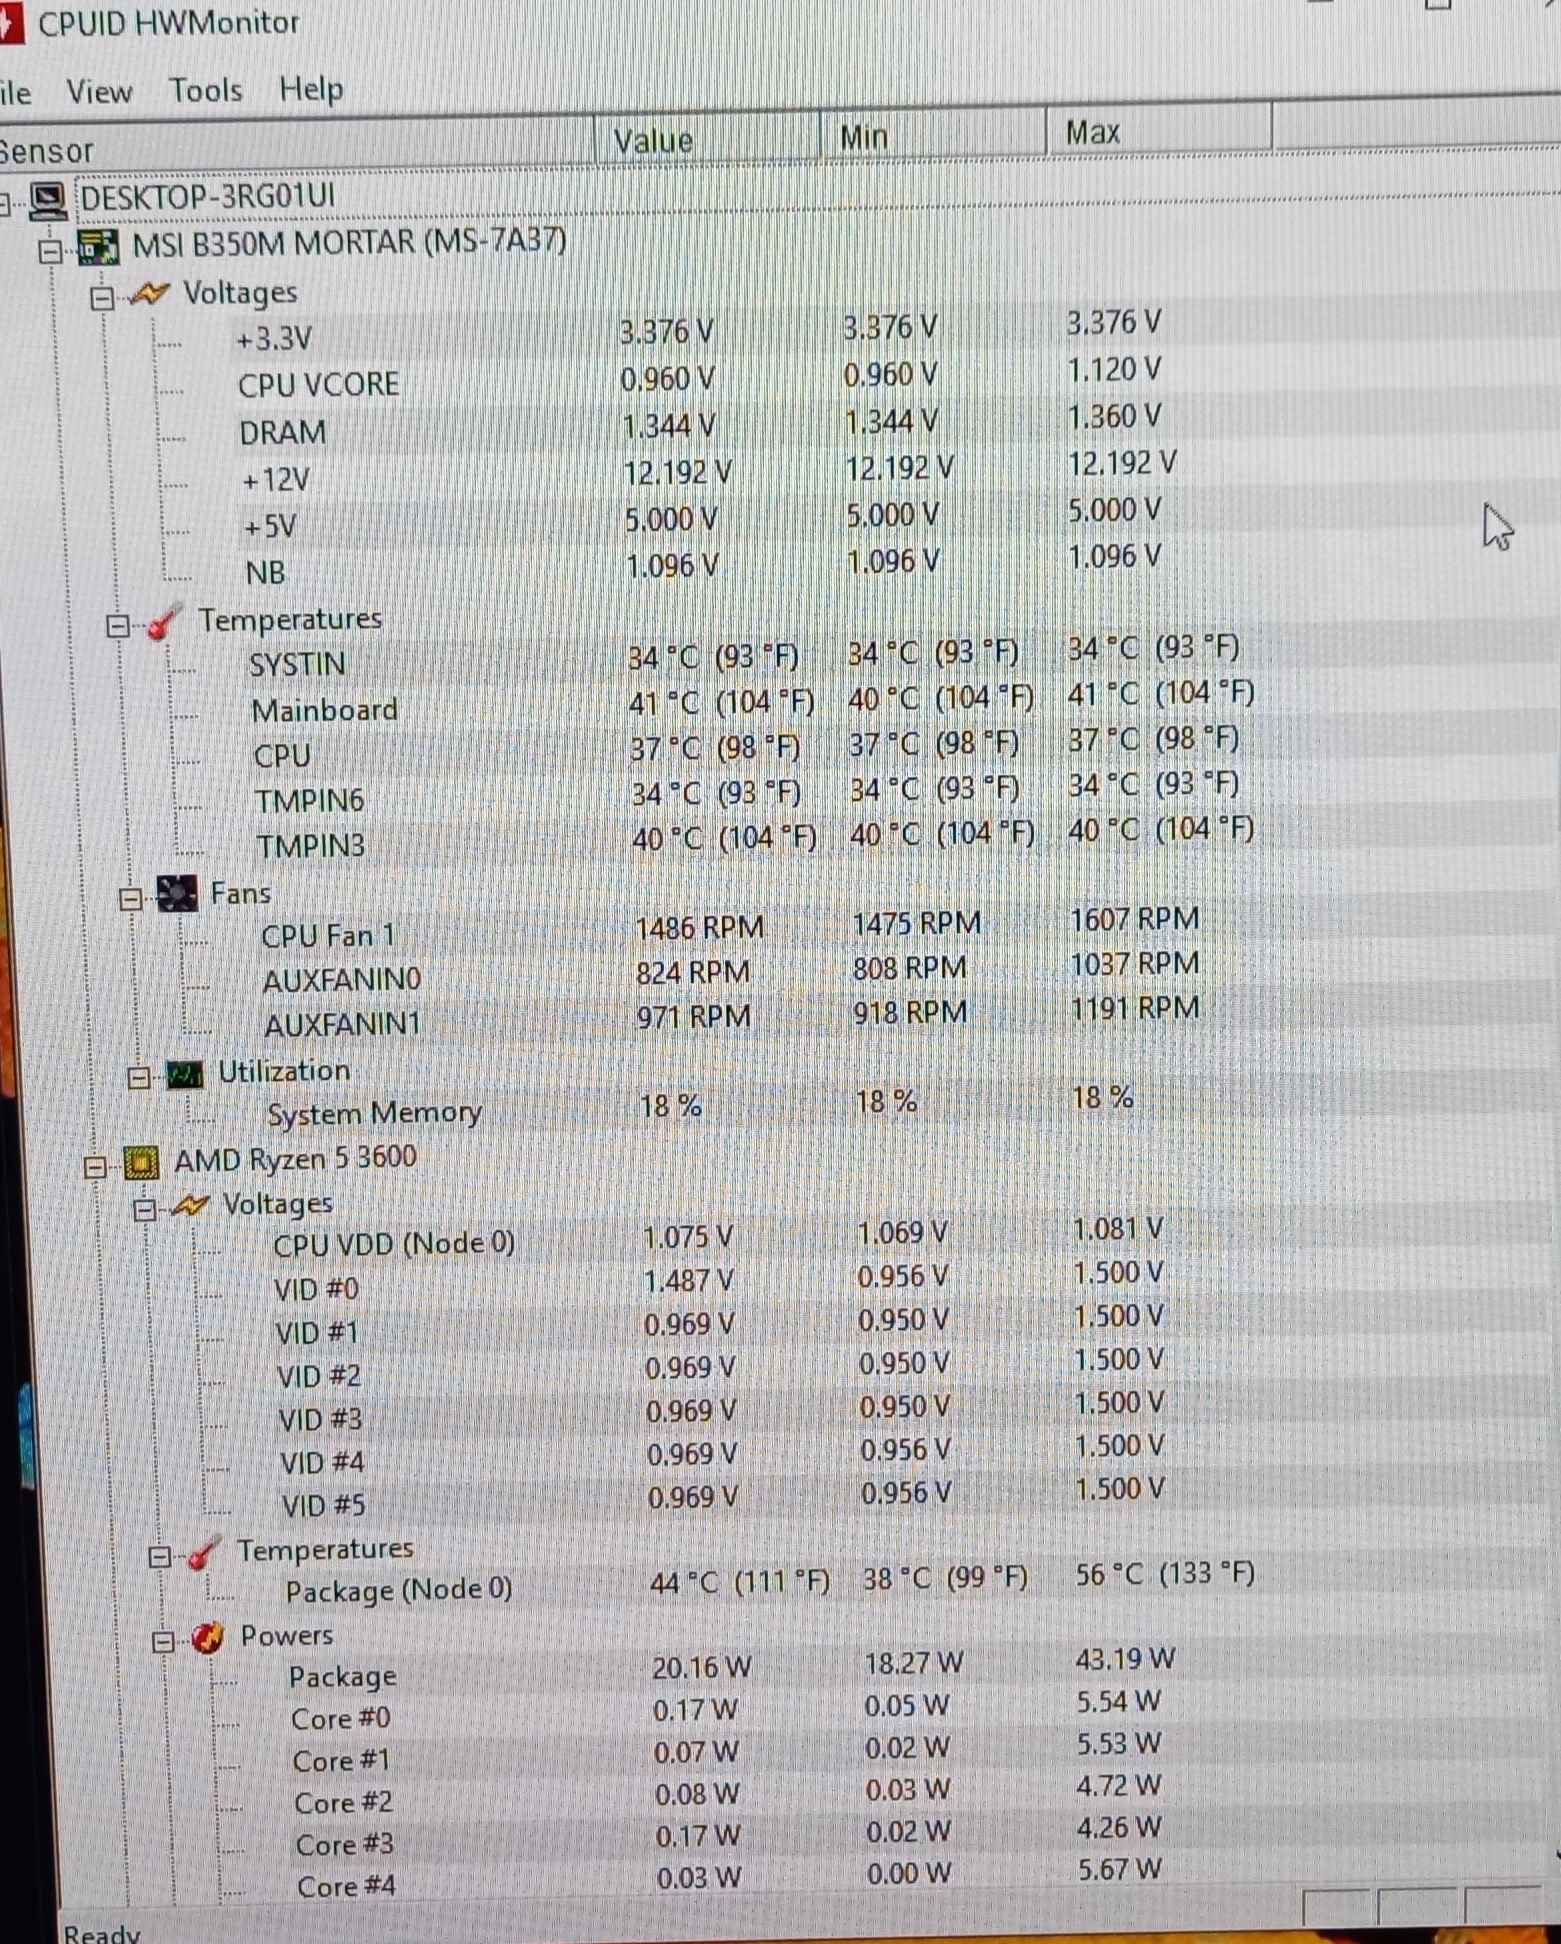 Ryzen 7 3700X - should it be getting this hot? - Troubleshooting